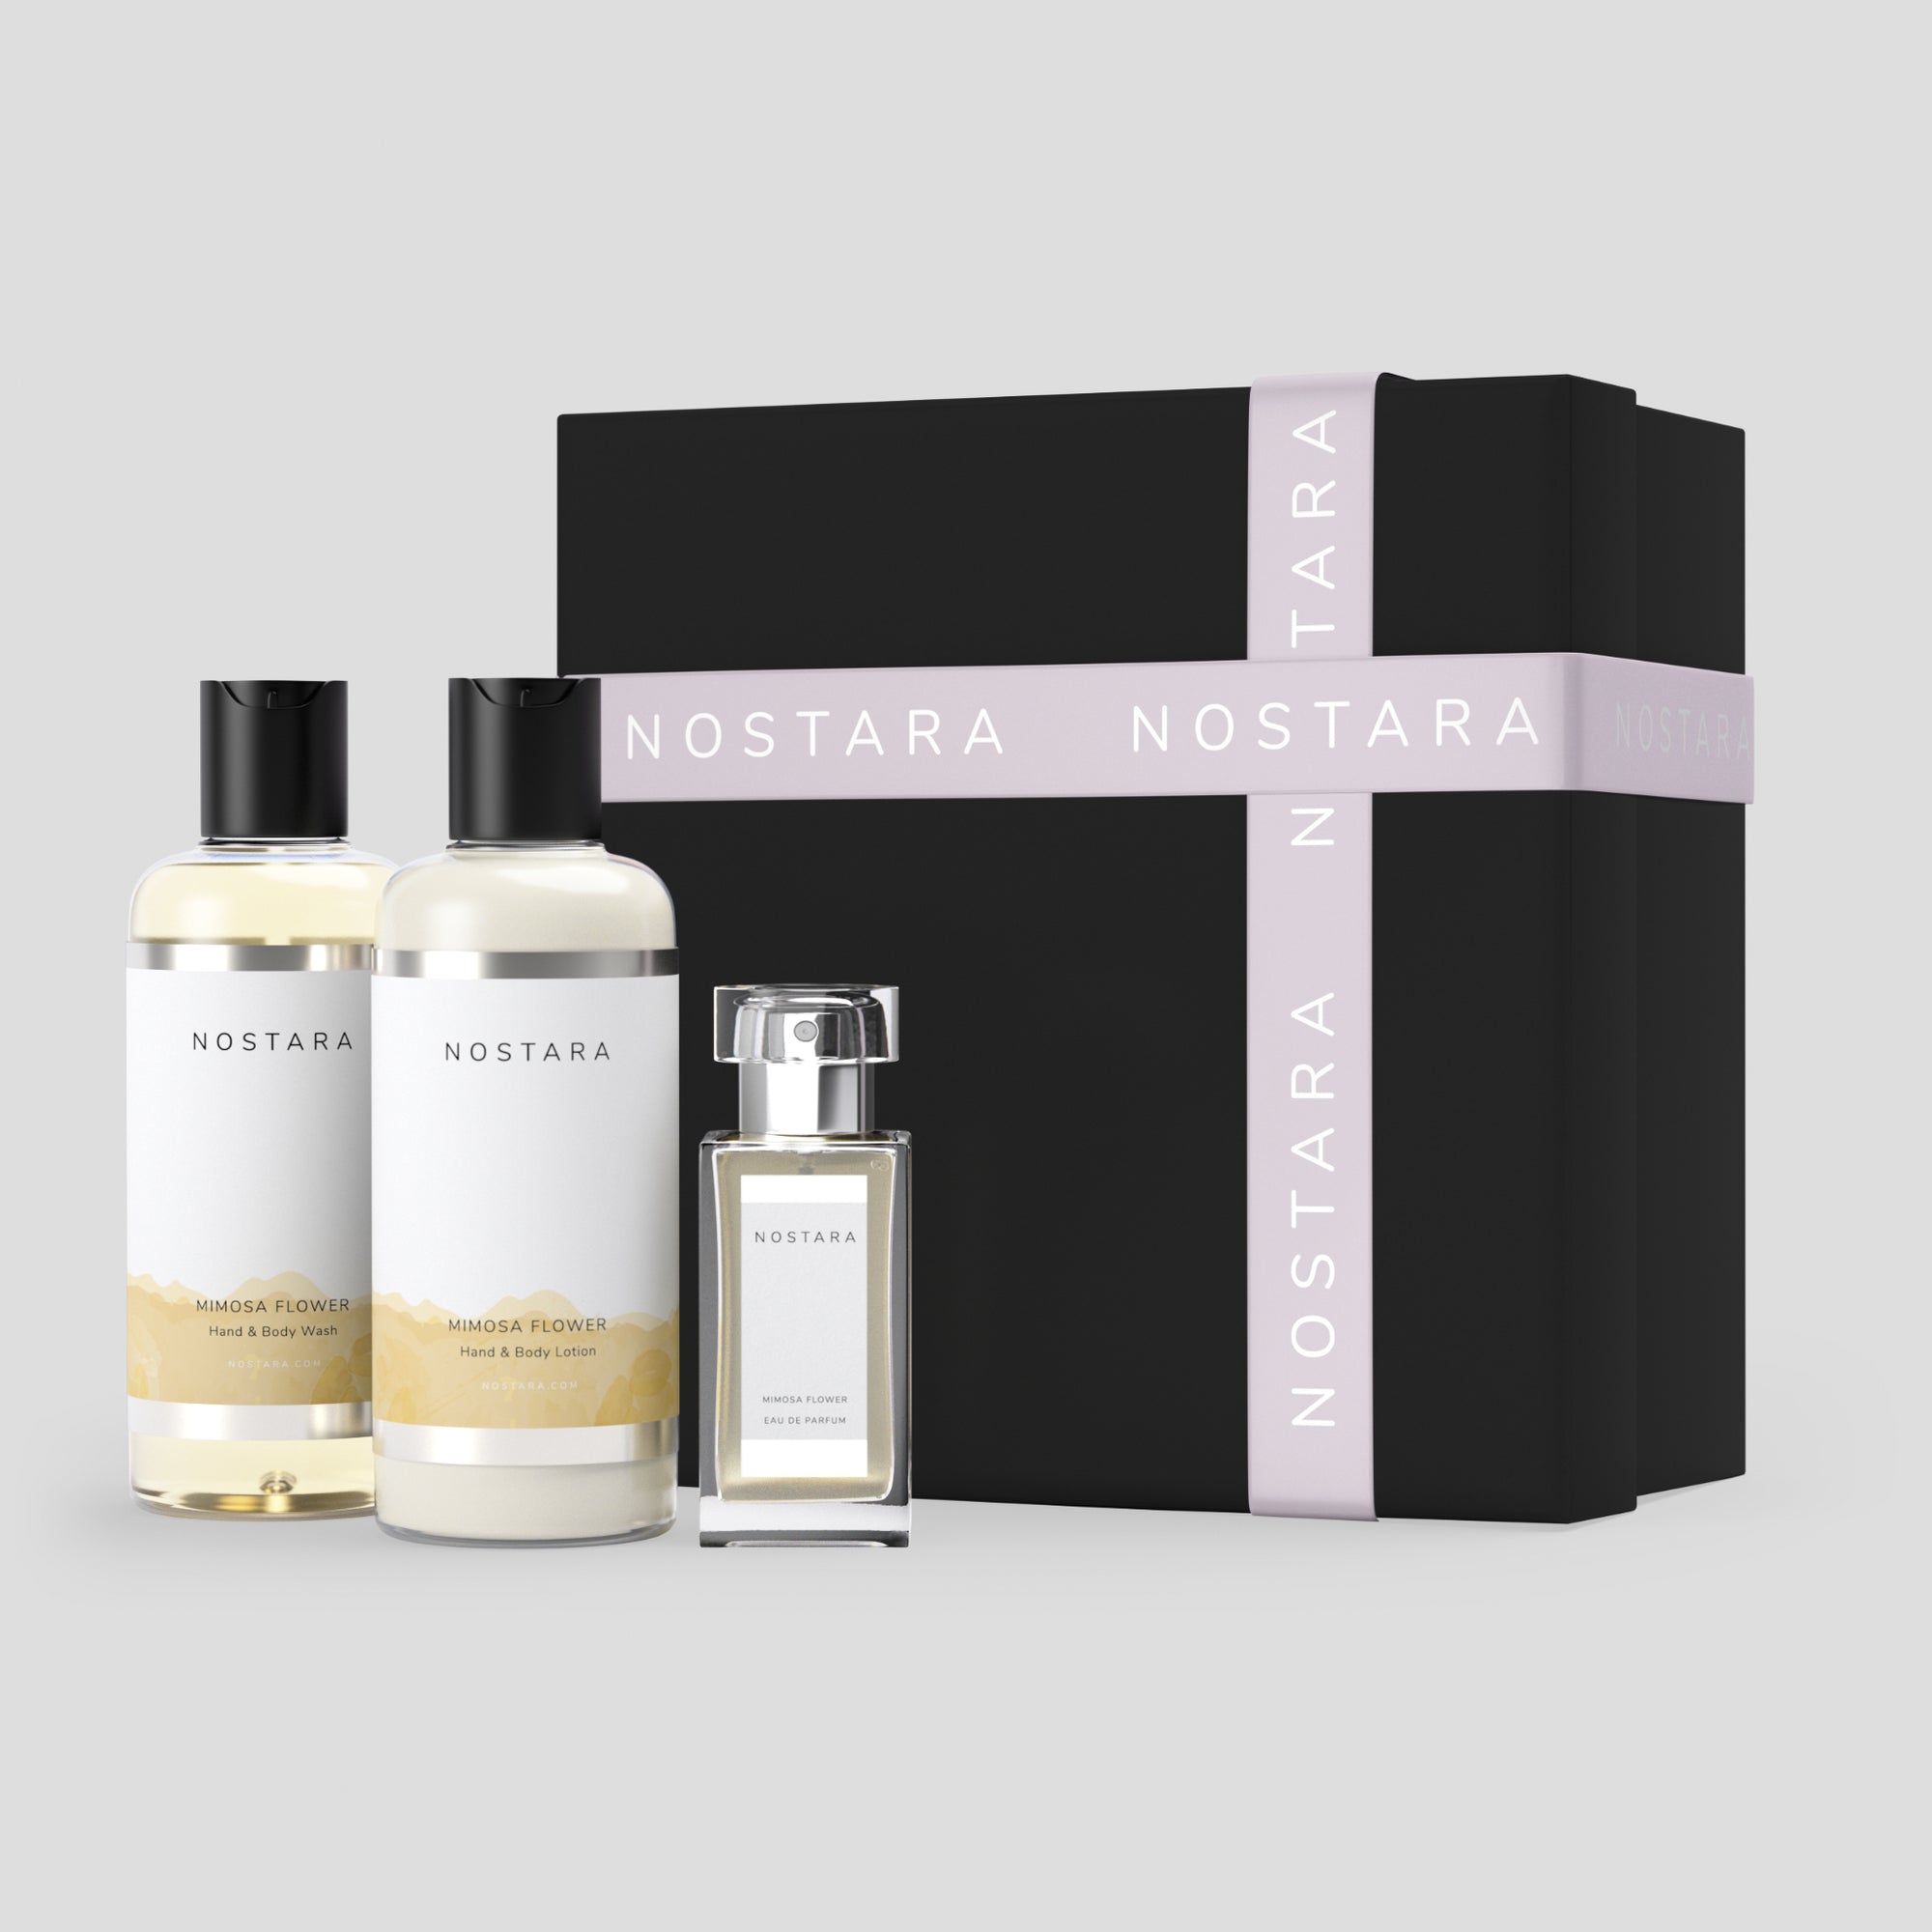 Nostara Fine Fragrance Perfume and bodycare wash and lotion image with gift box